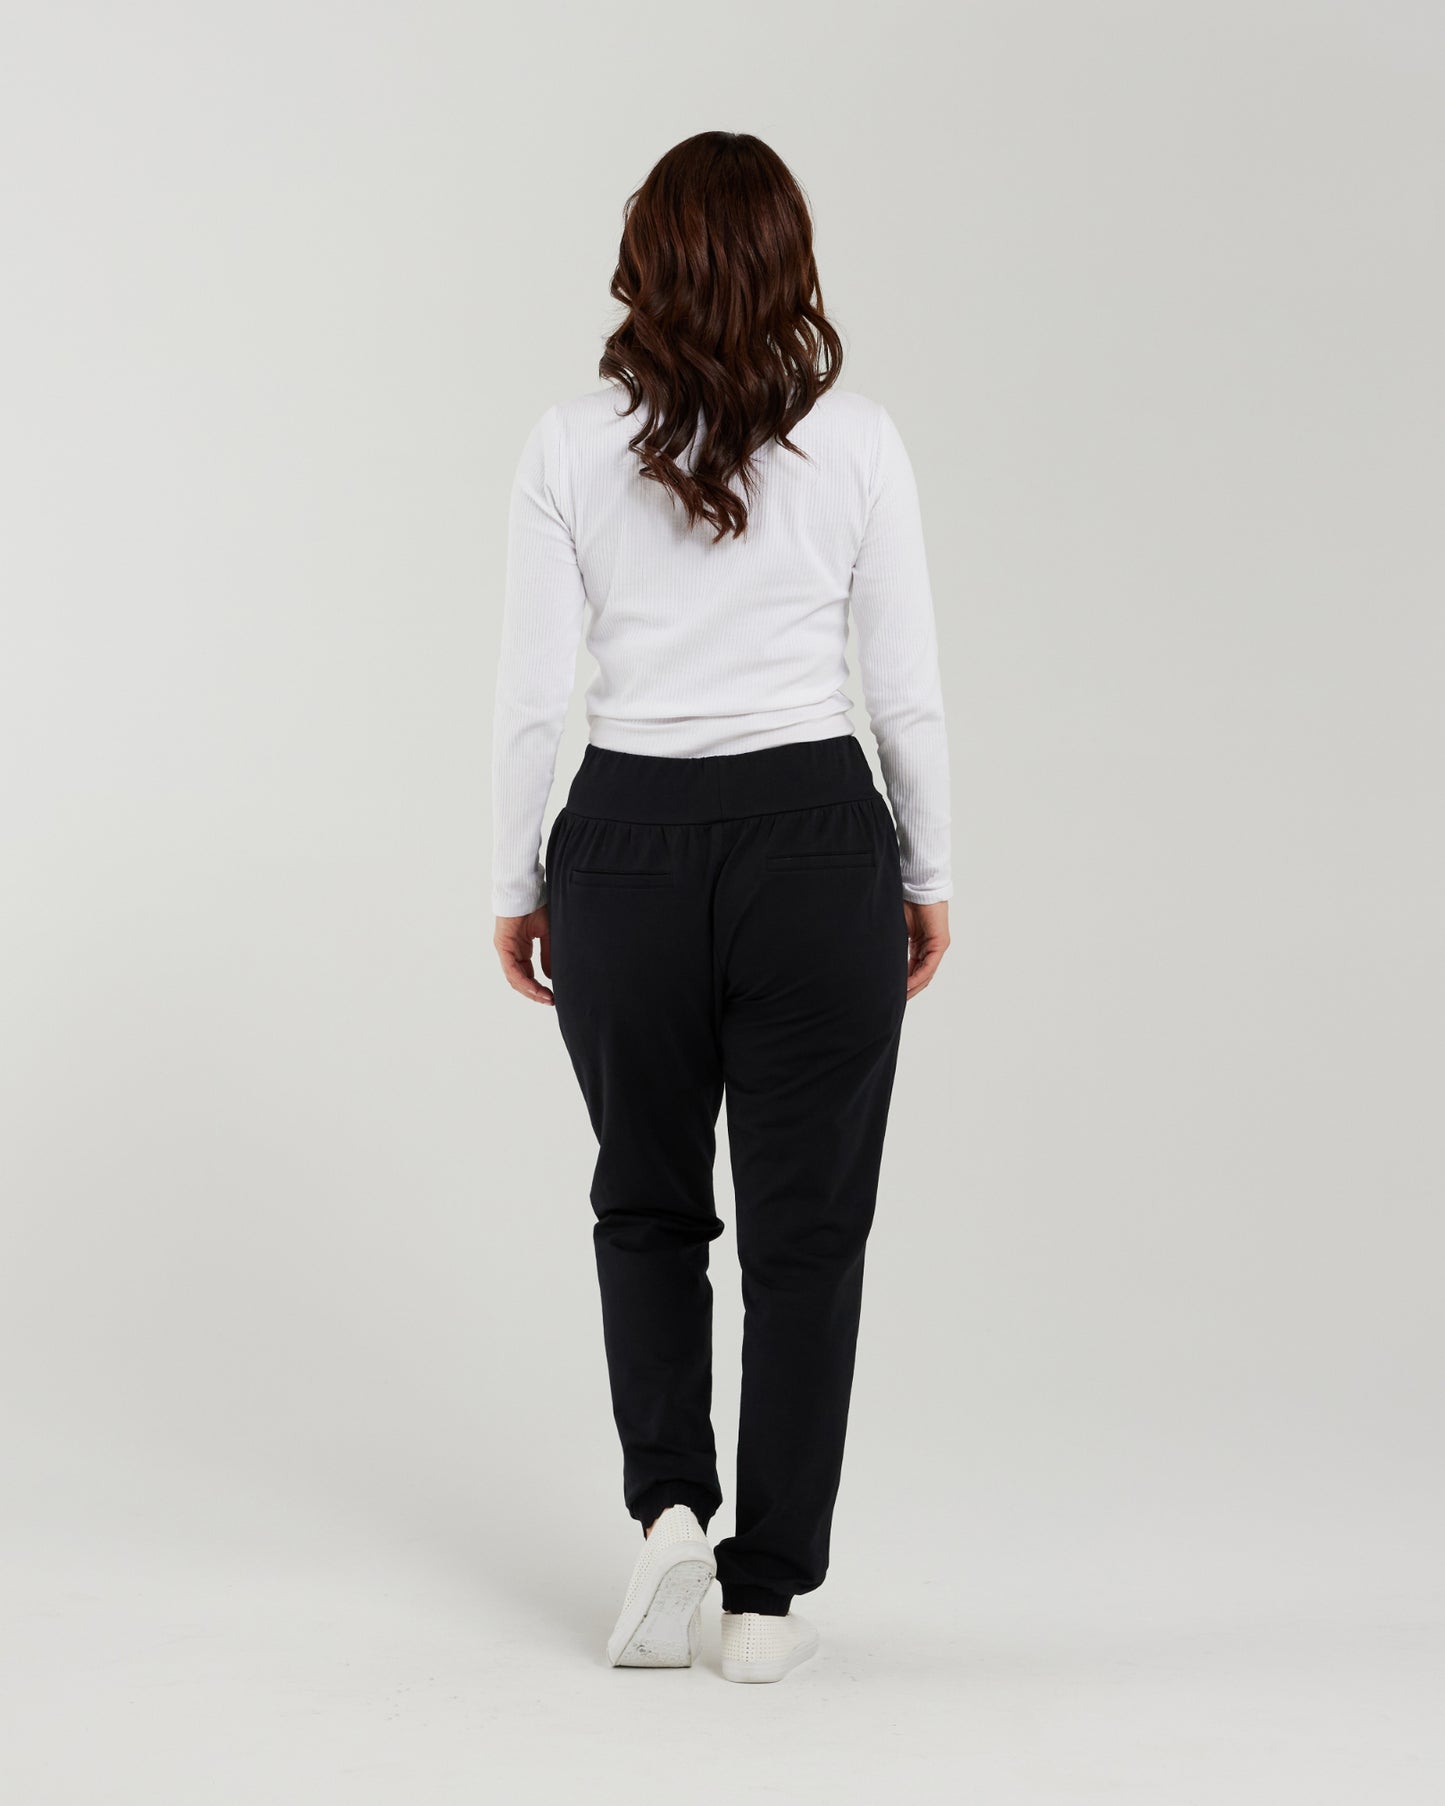 Zafina - Audrey Cotton Pull On Pant - Black - Due 1st March